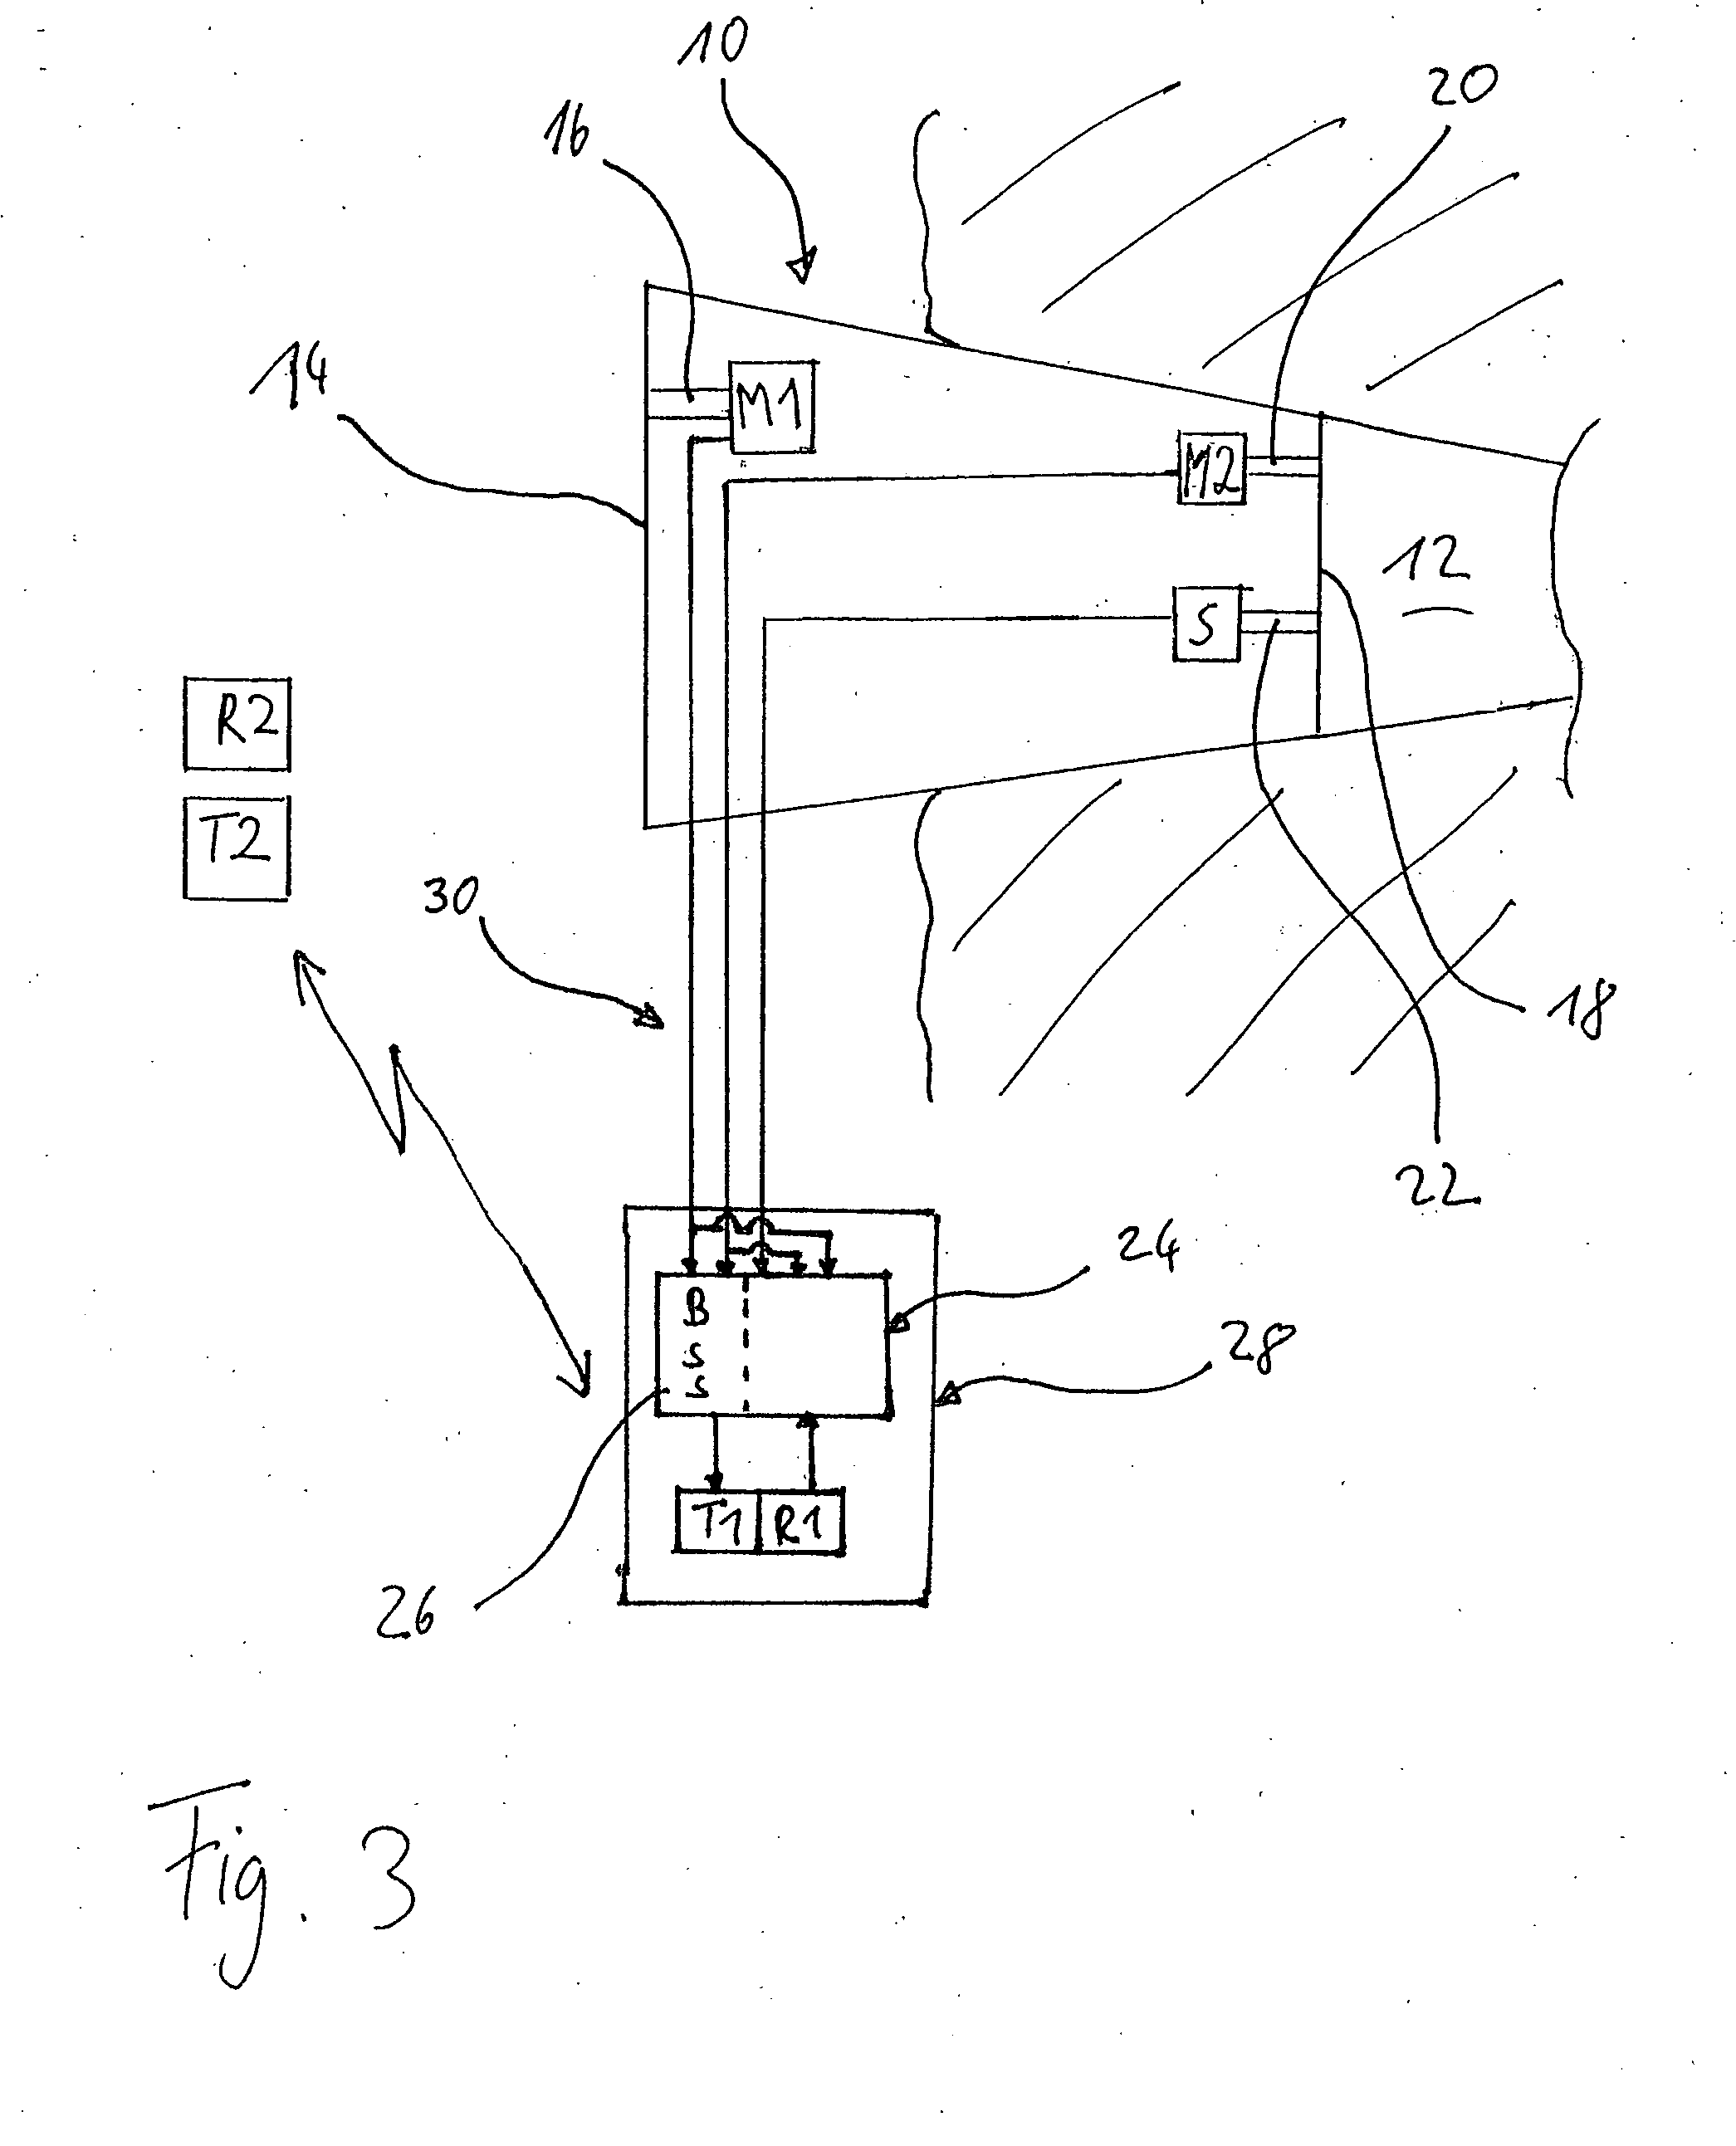 System and method for separation of a user's voice from ambient sound